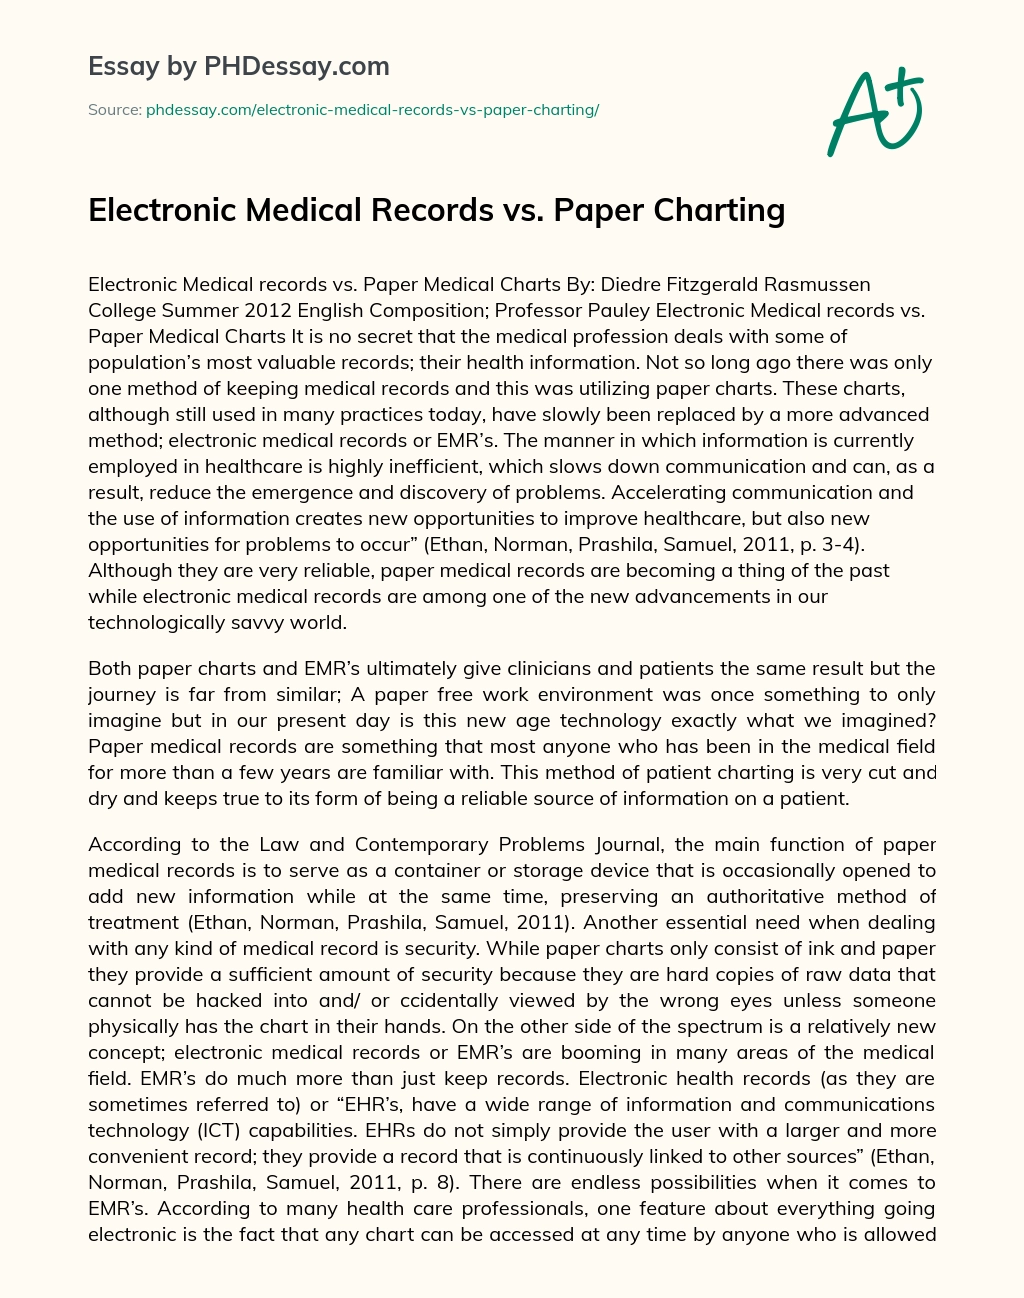 Electronic Medical Records vs. Paper Charting essay